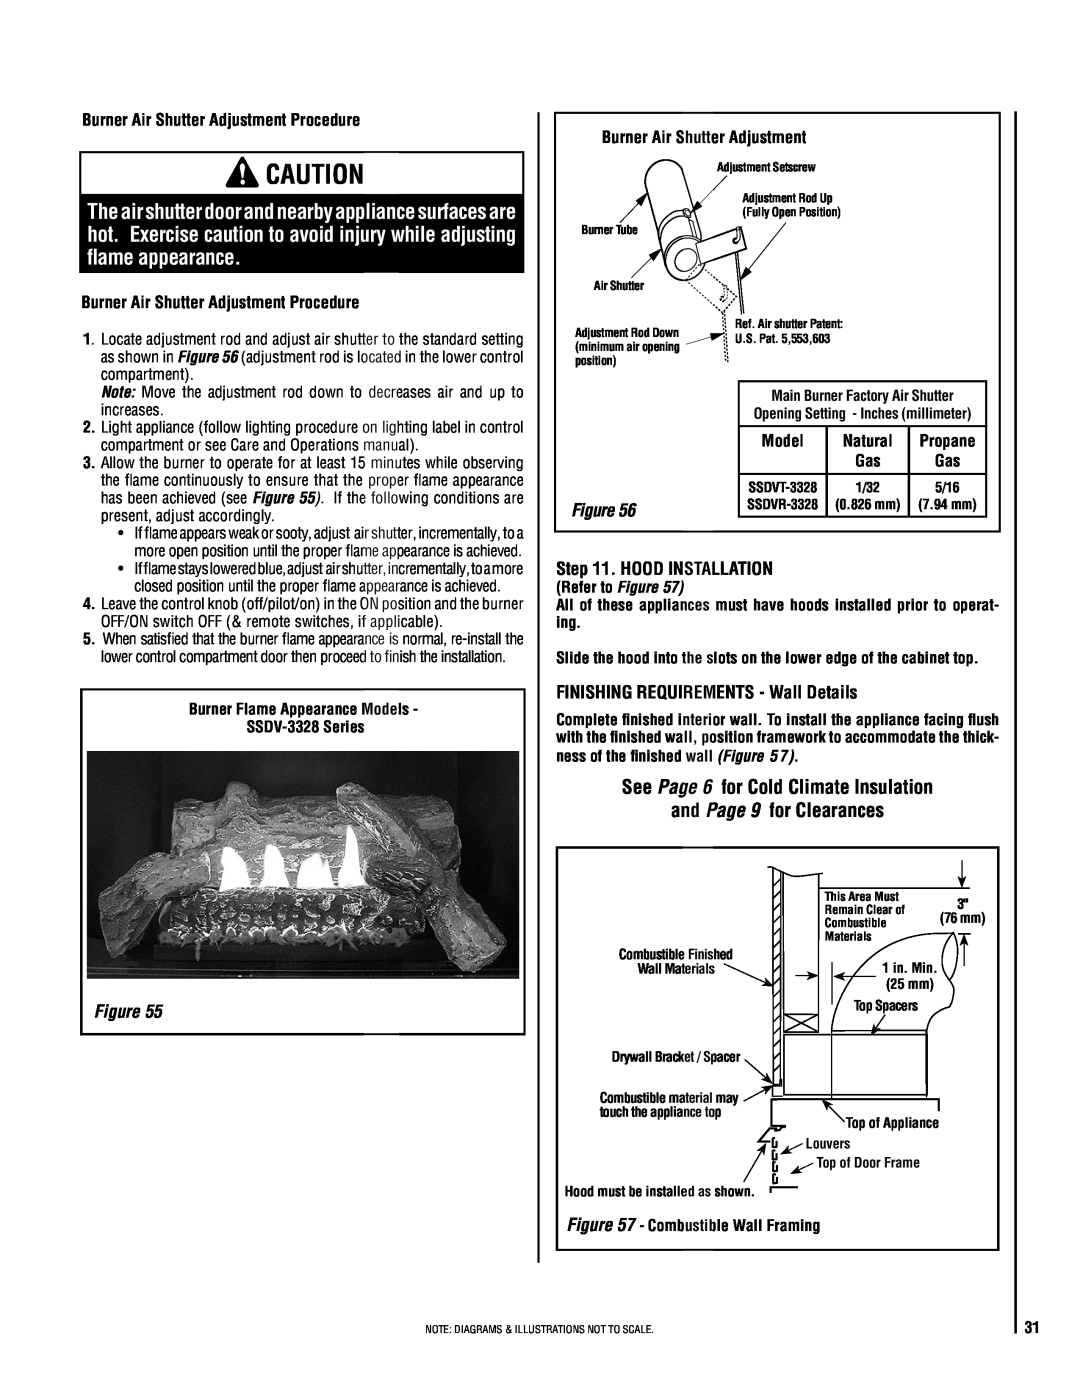 TOA Electronics SSDV-3328 See Page 6 for Cold Climate Insulation and Page 9 for Clearances, Hood Installation 